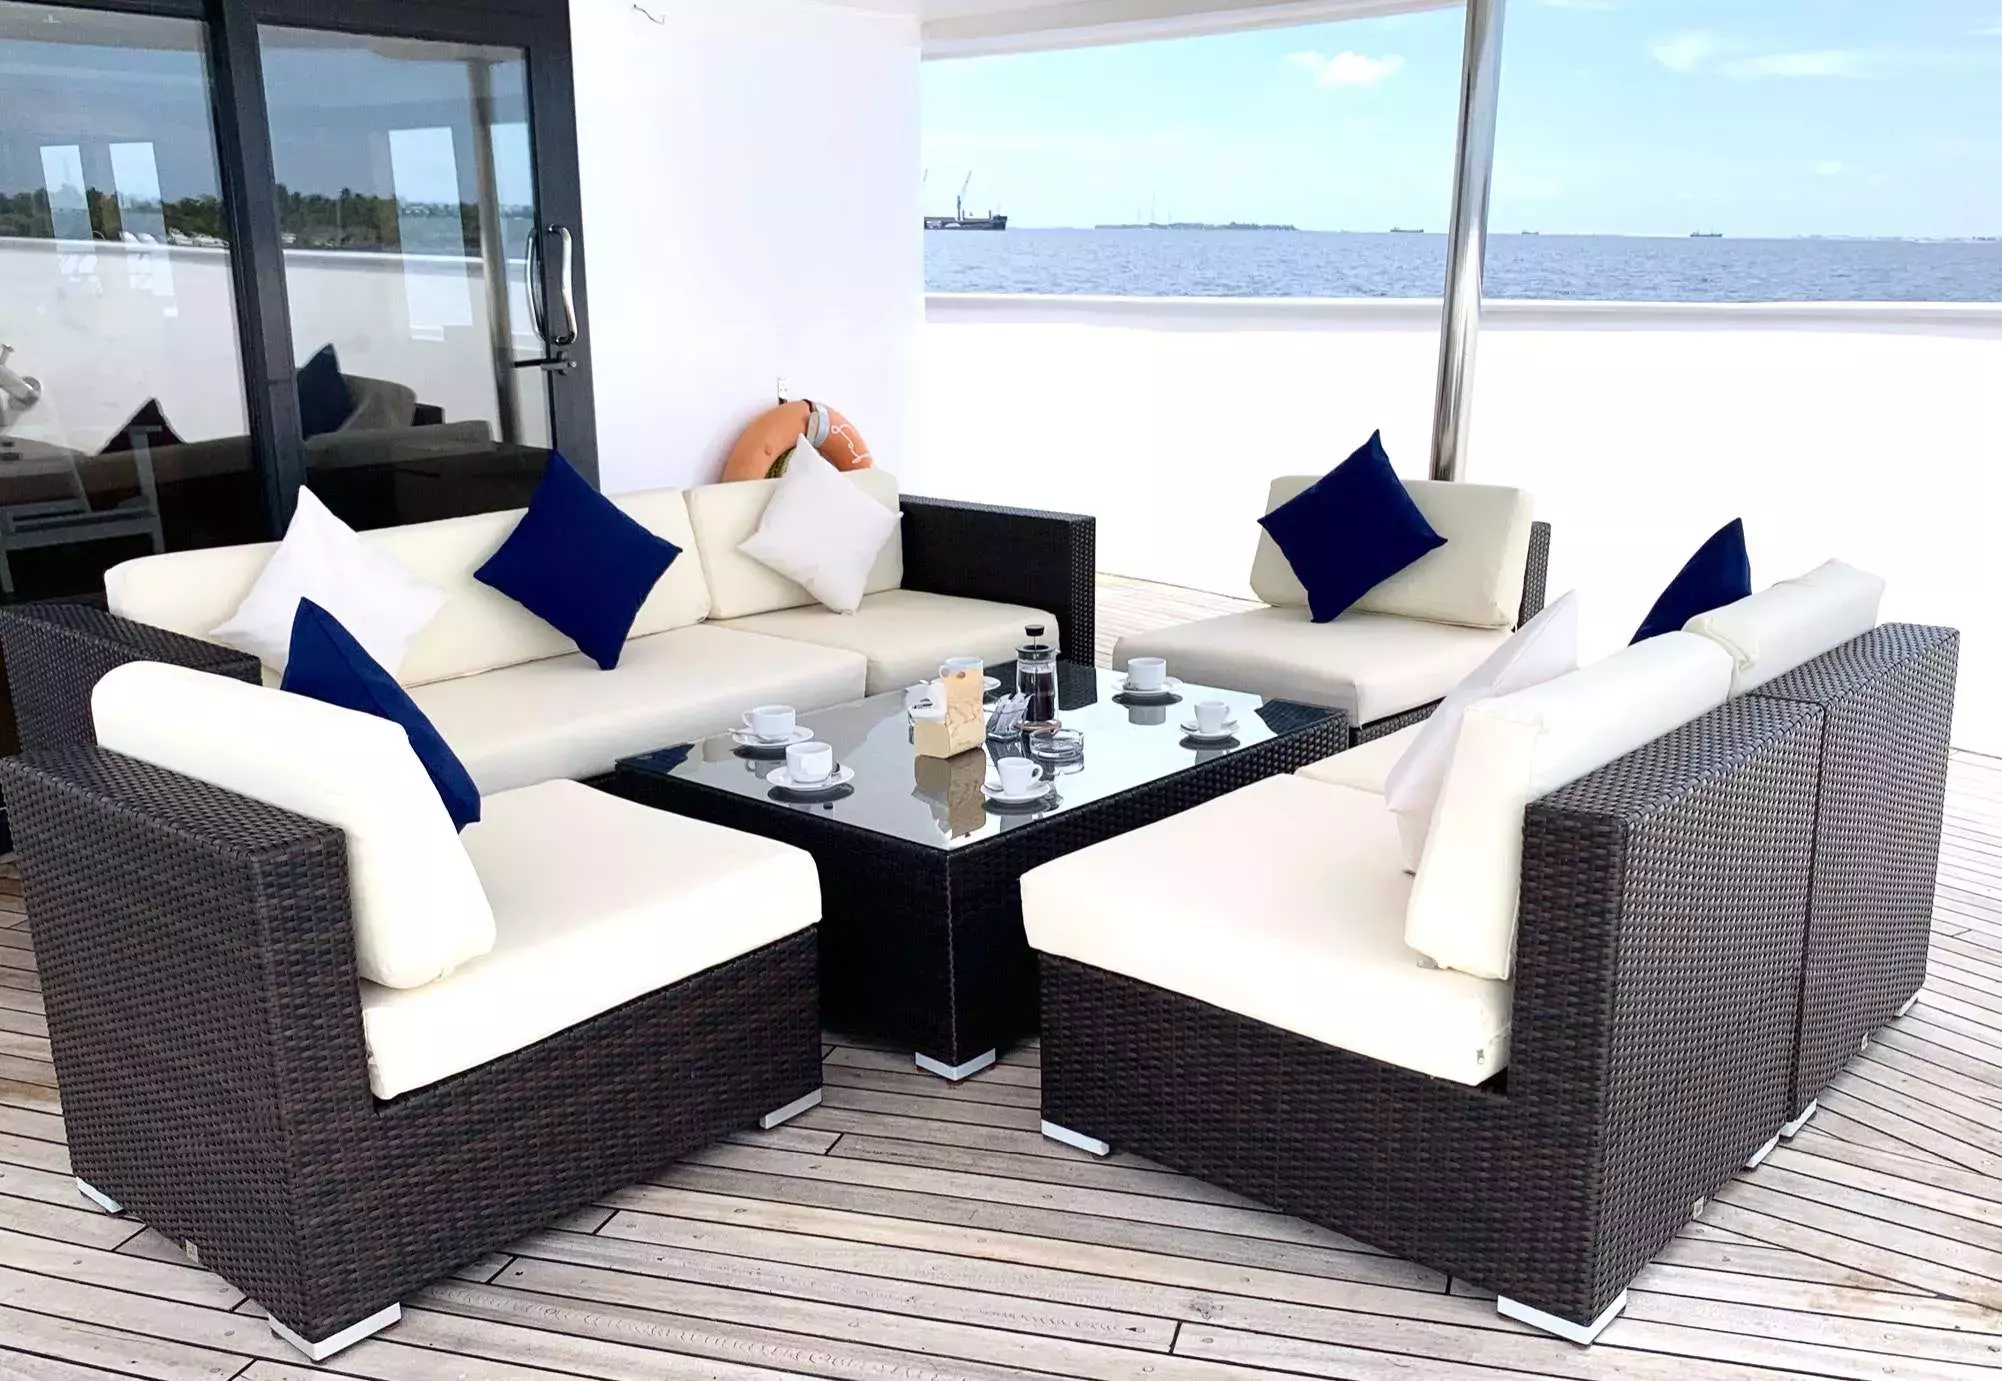 Safira by Custom Made - Top rates for a Rental of a private Superyacht in Mauritius